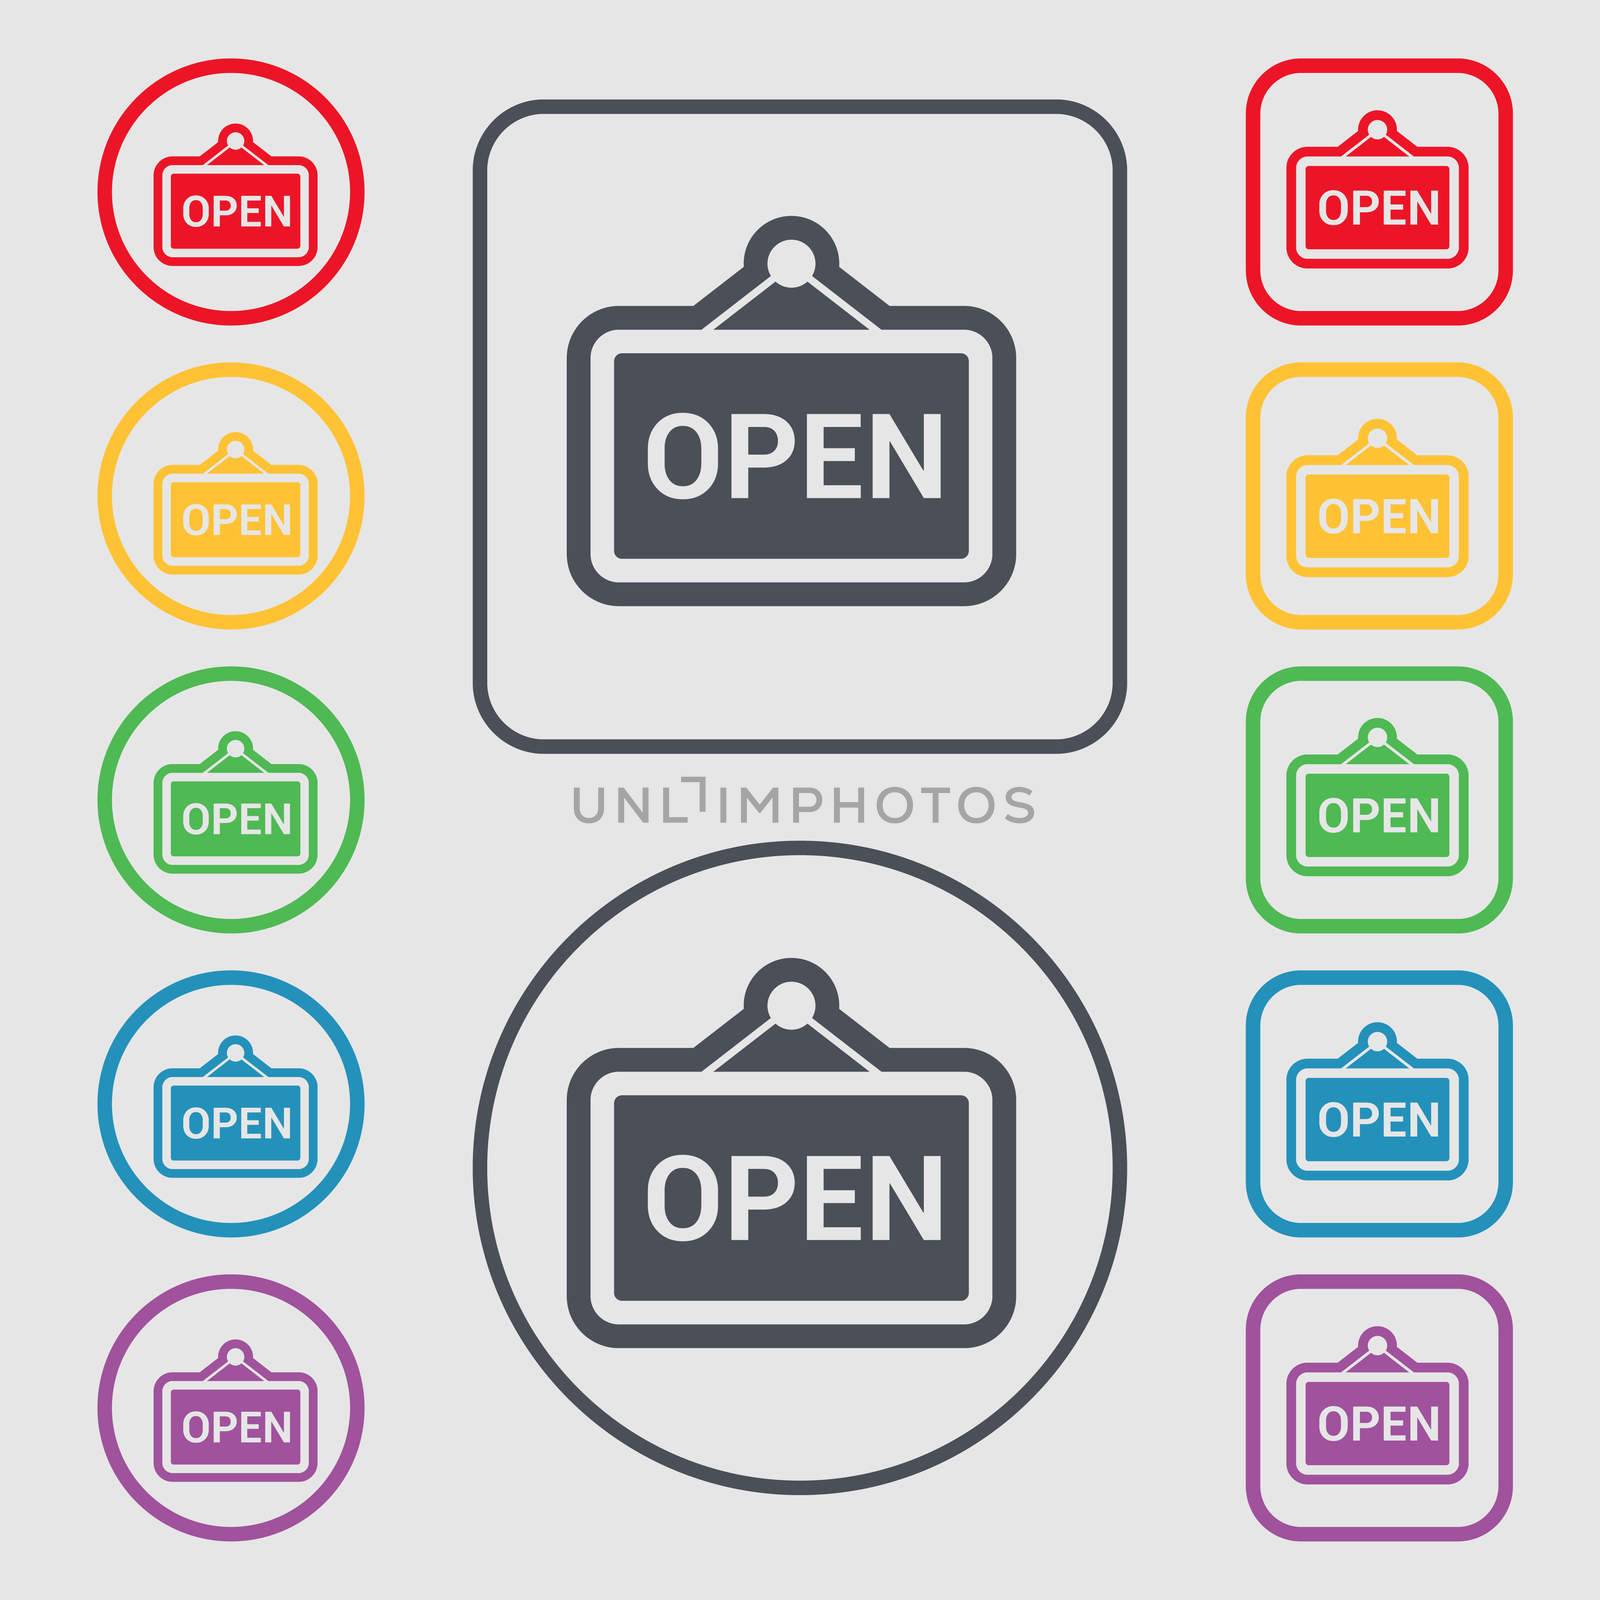 open icon sign. symbol on the Round and square buttons with frame. illustration